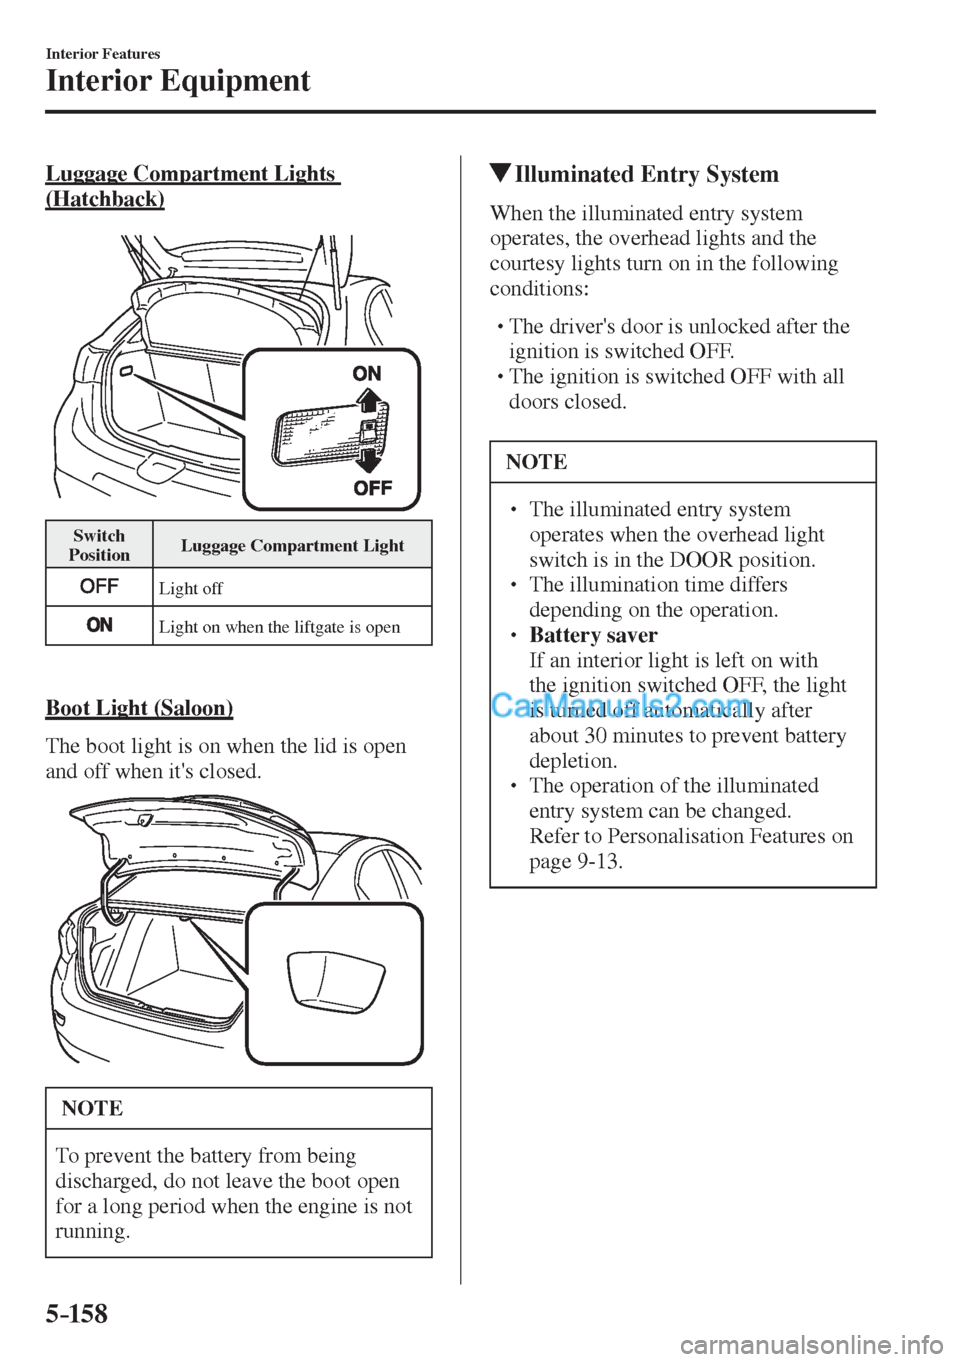 MAZDA MODEL 2 2017  Owners Manual (in English) 5–158
Interior Features
Interior Equipment
  Luggage  Compartment  Lights 
(Hatchback)
   
 
 Switch 
Position  Luggage Compartment Light 
 
 
 Light  off 
 
 
 Light on when the liftgate is open 
 